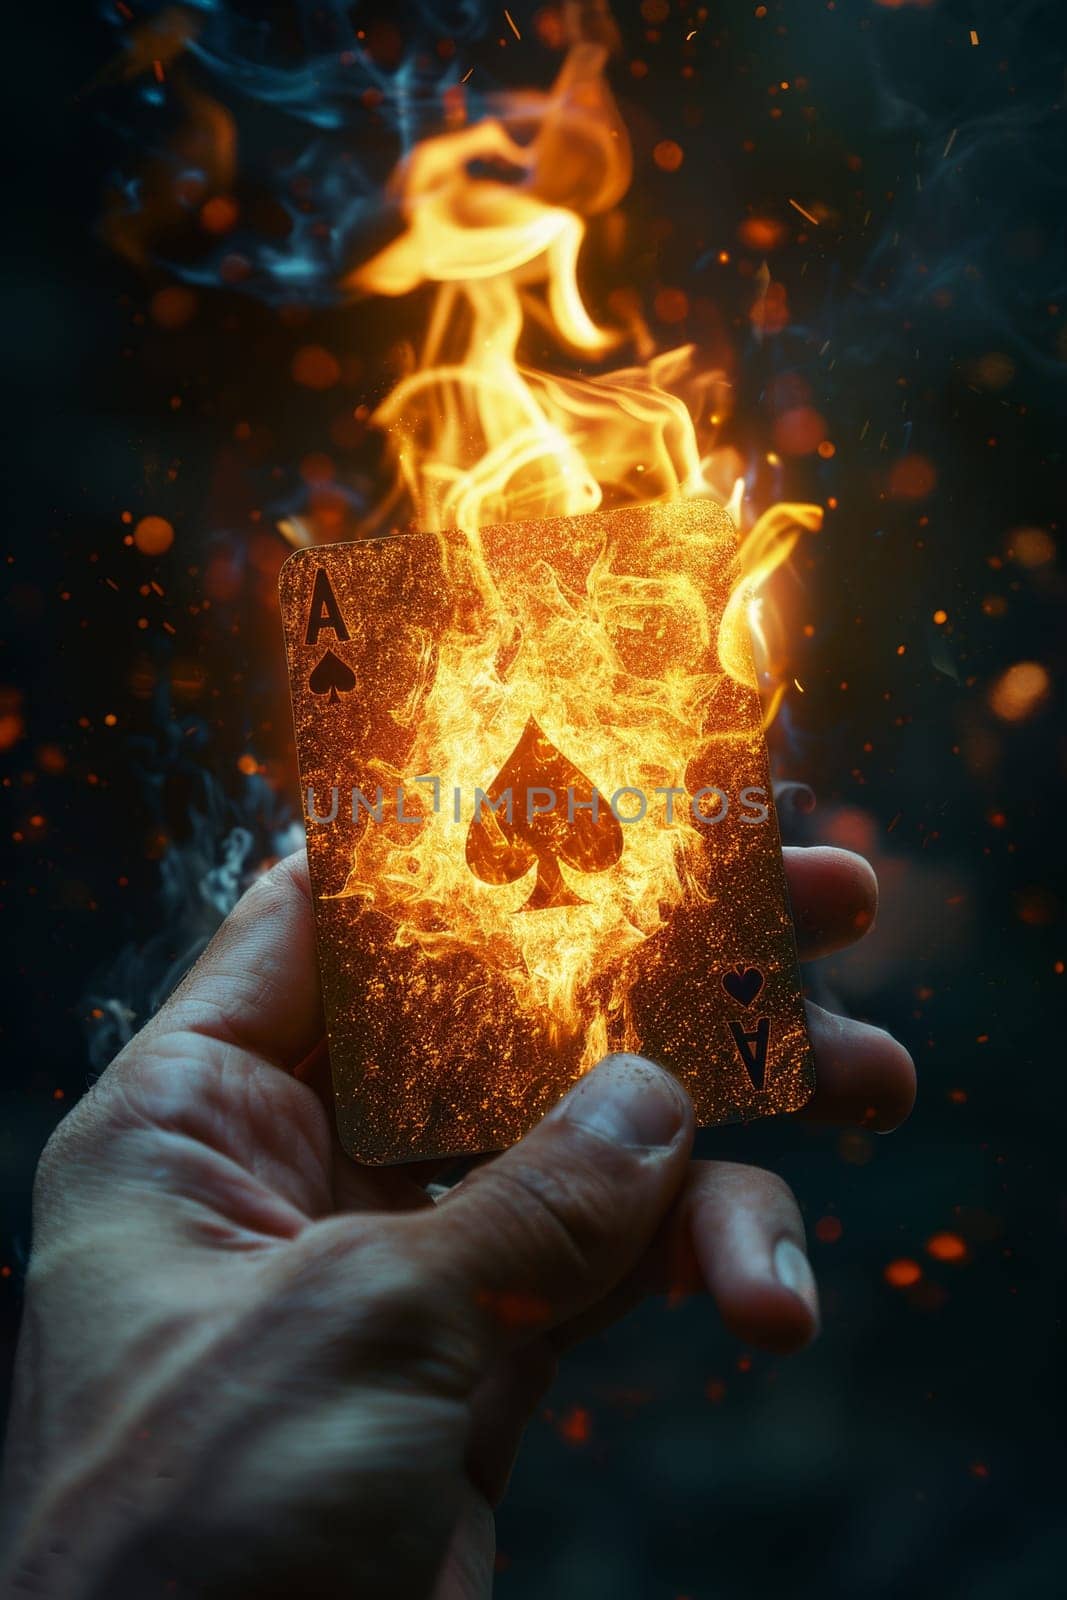 A hand holding a card on it and flames surrounding it. Concept of magic and wonder, as if the card is a powerful object that can bring good fortune or change the course of events